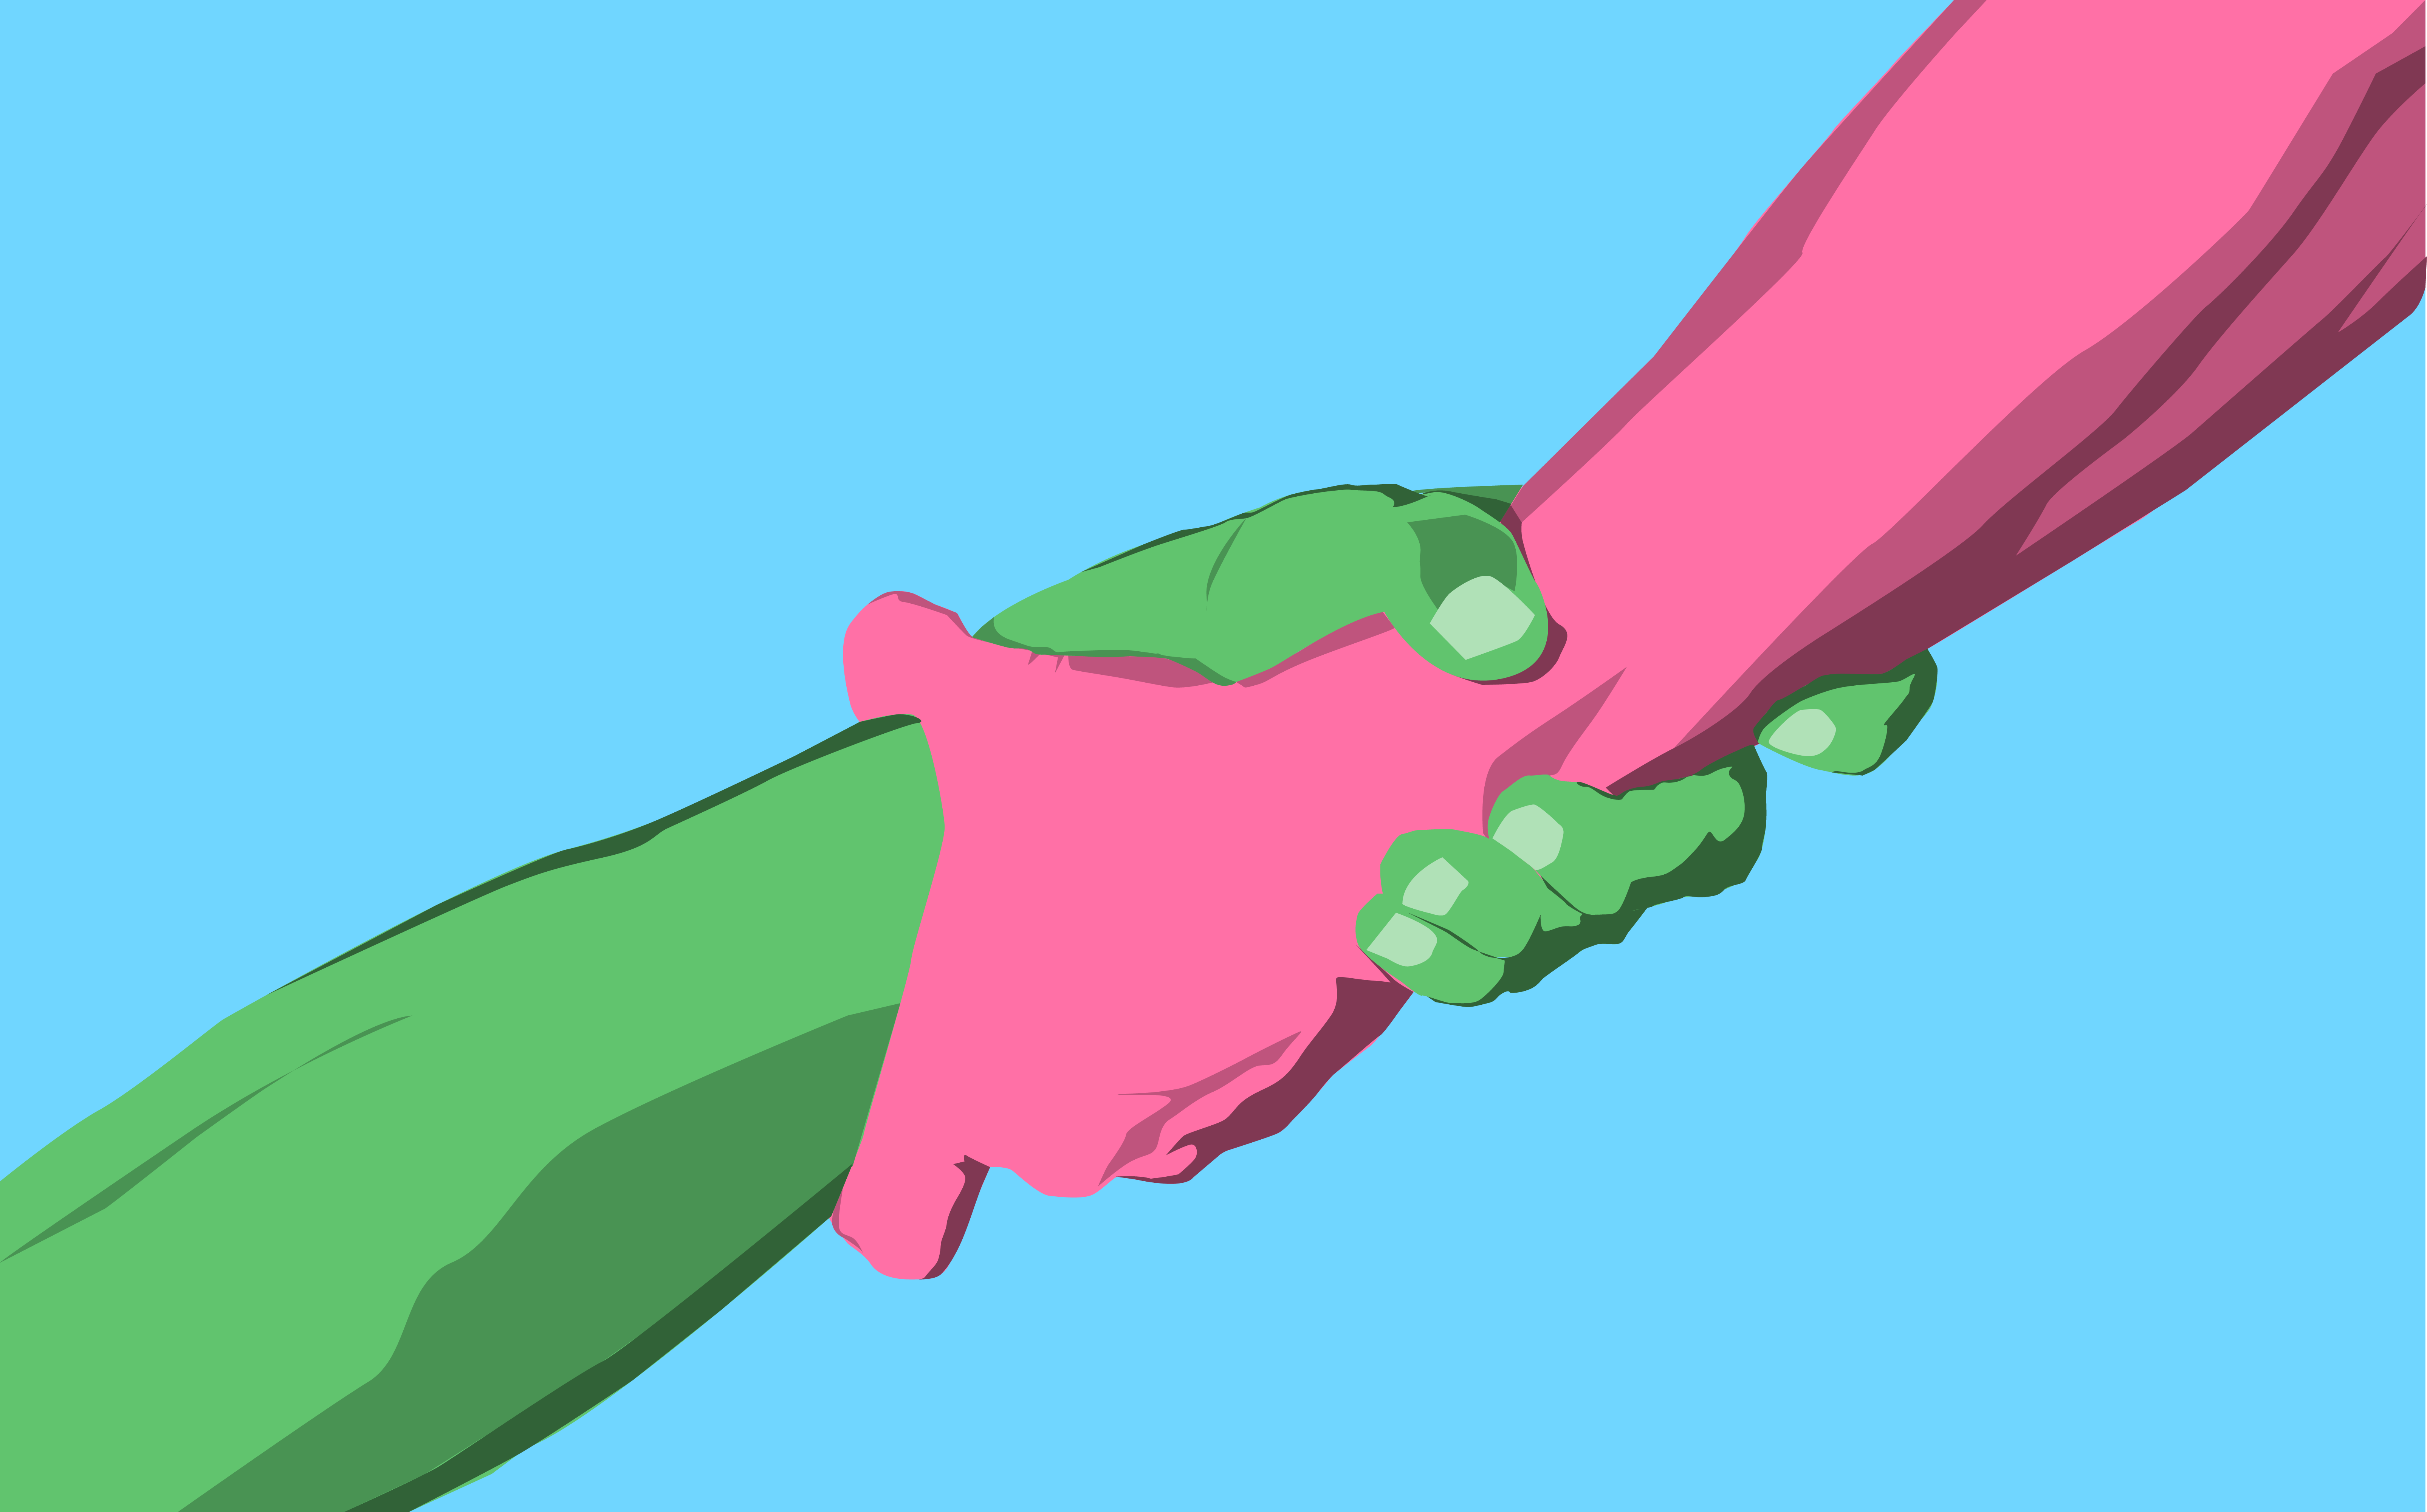 Two hands hold onto each other, symbolizing two people helping each other while writing a story.